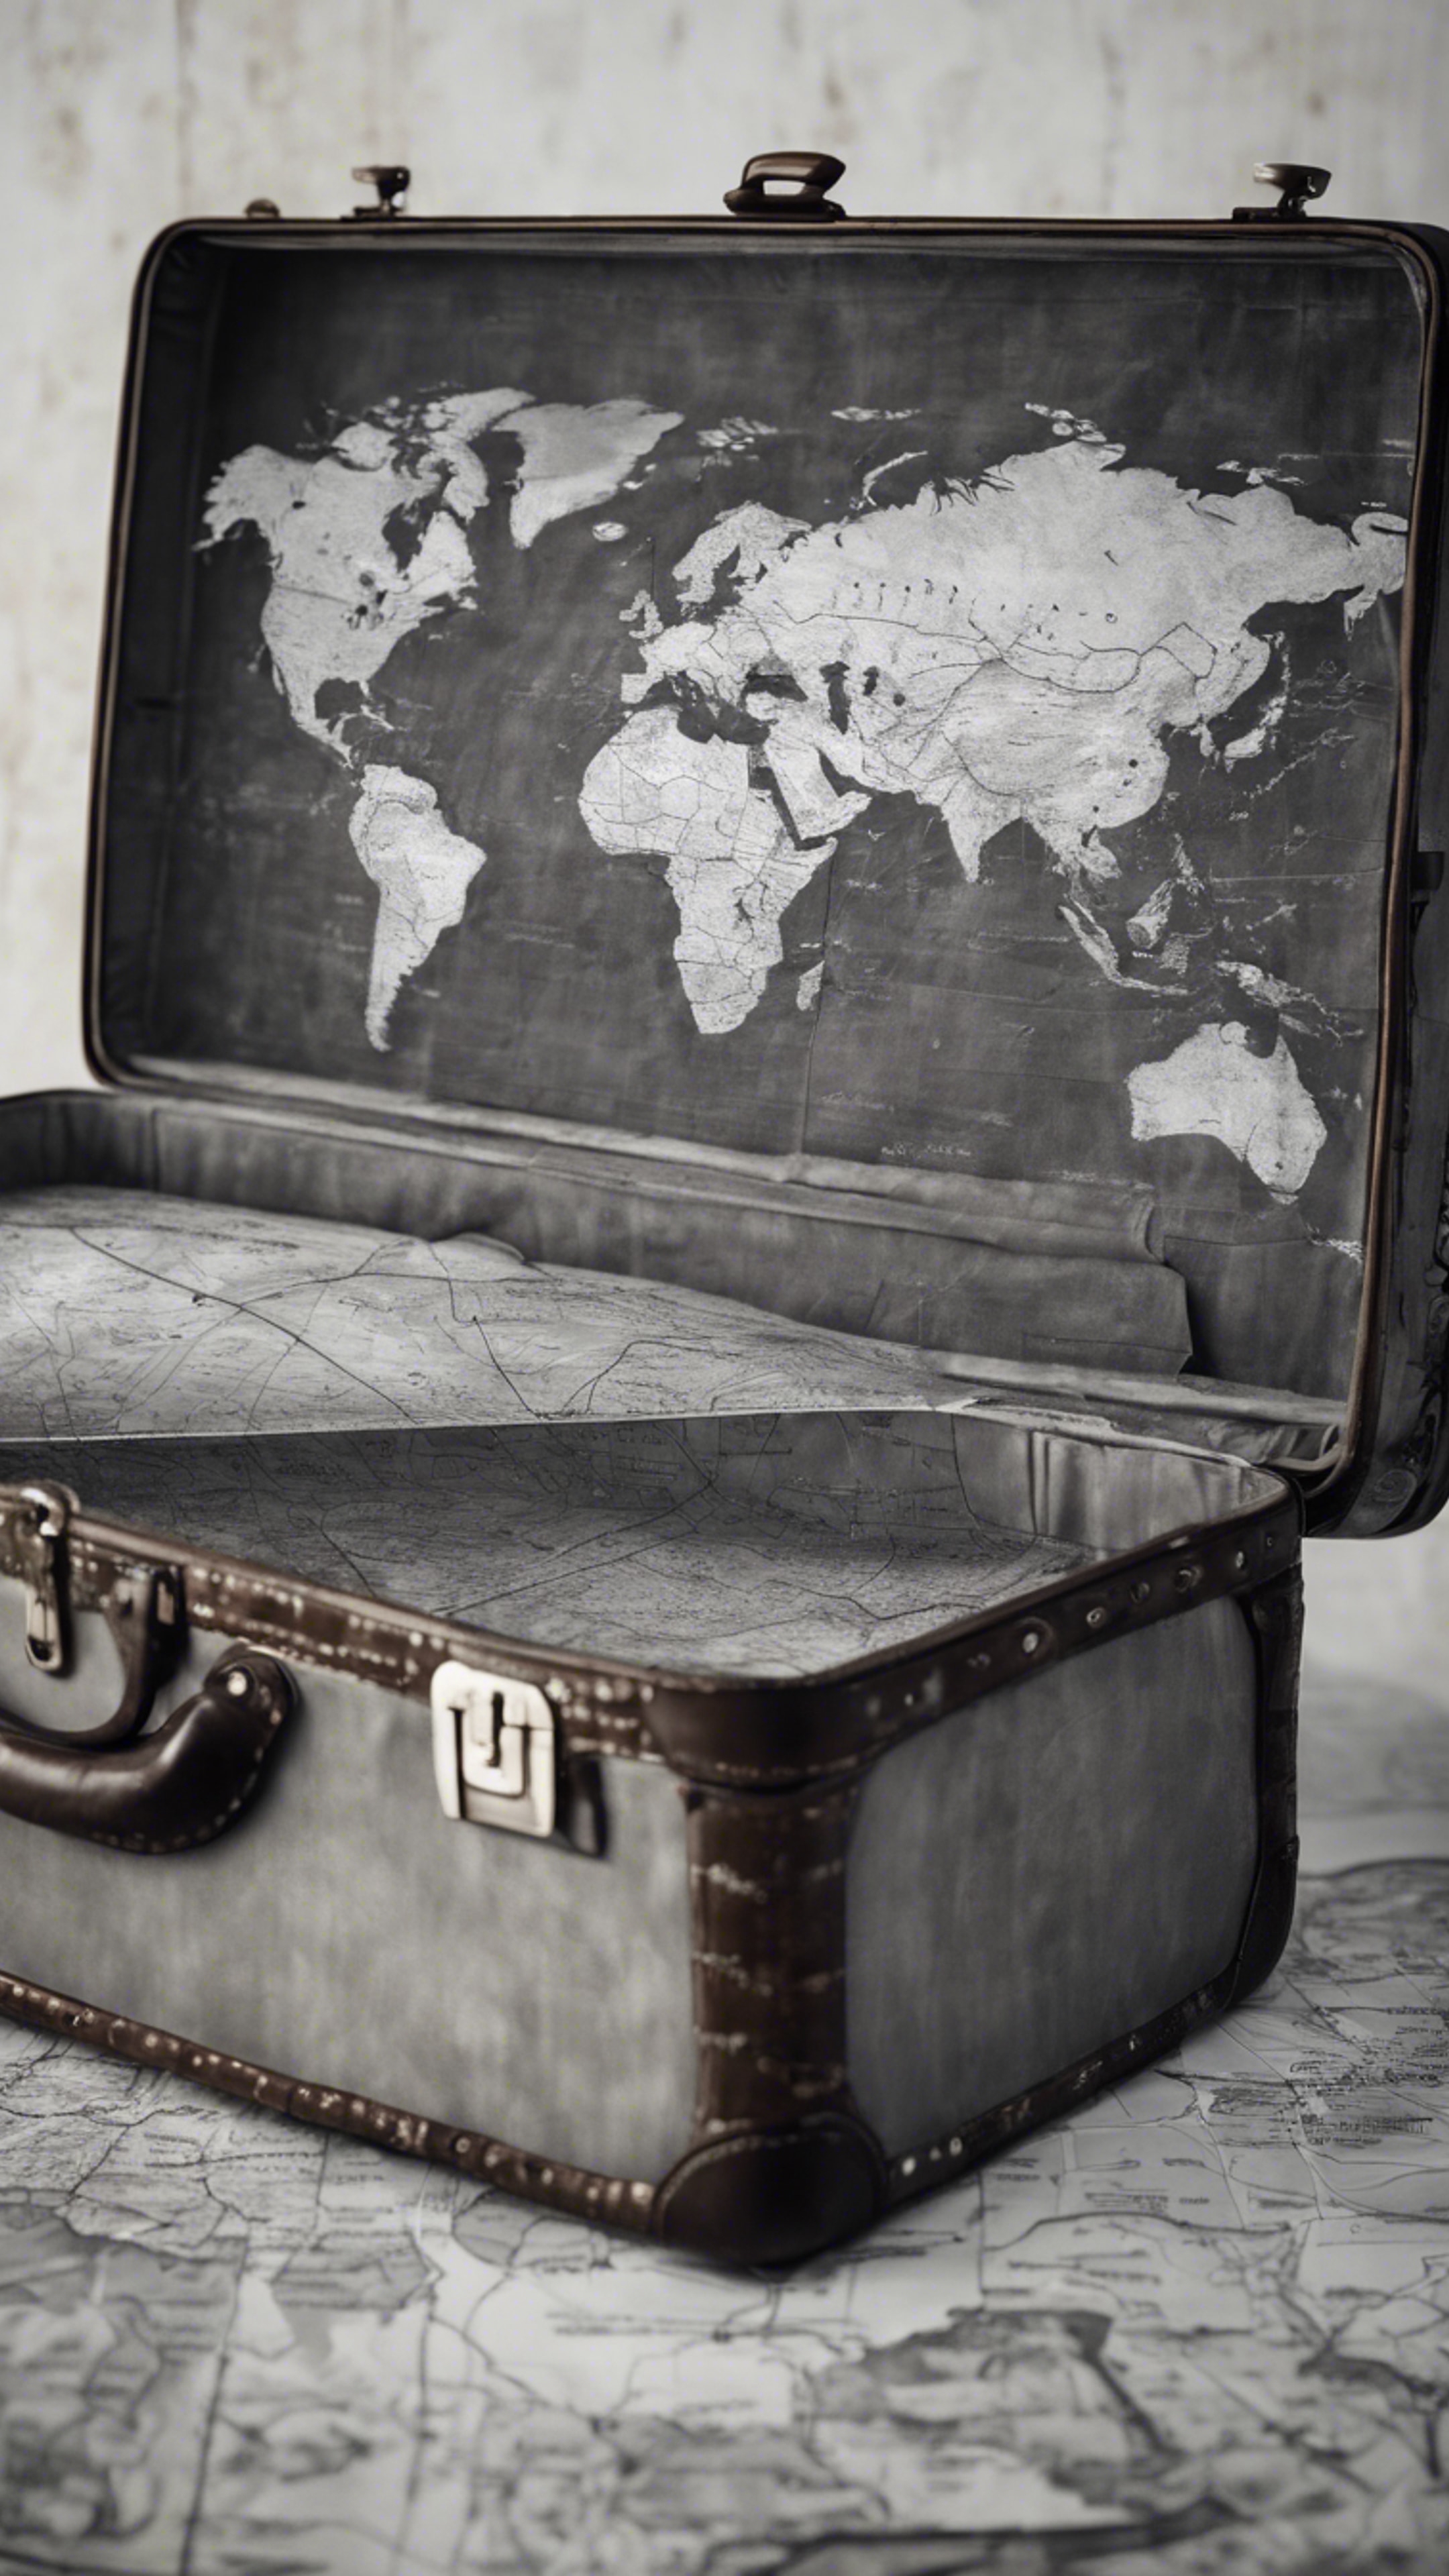 A grayscale world map painted on a vintage suitcase. ផ្ទាំង​រូបភាព[27f356ac8e6847fe804a]